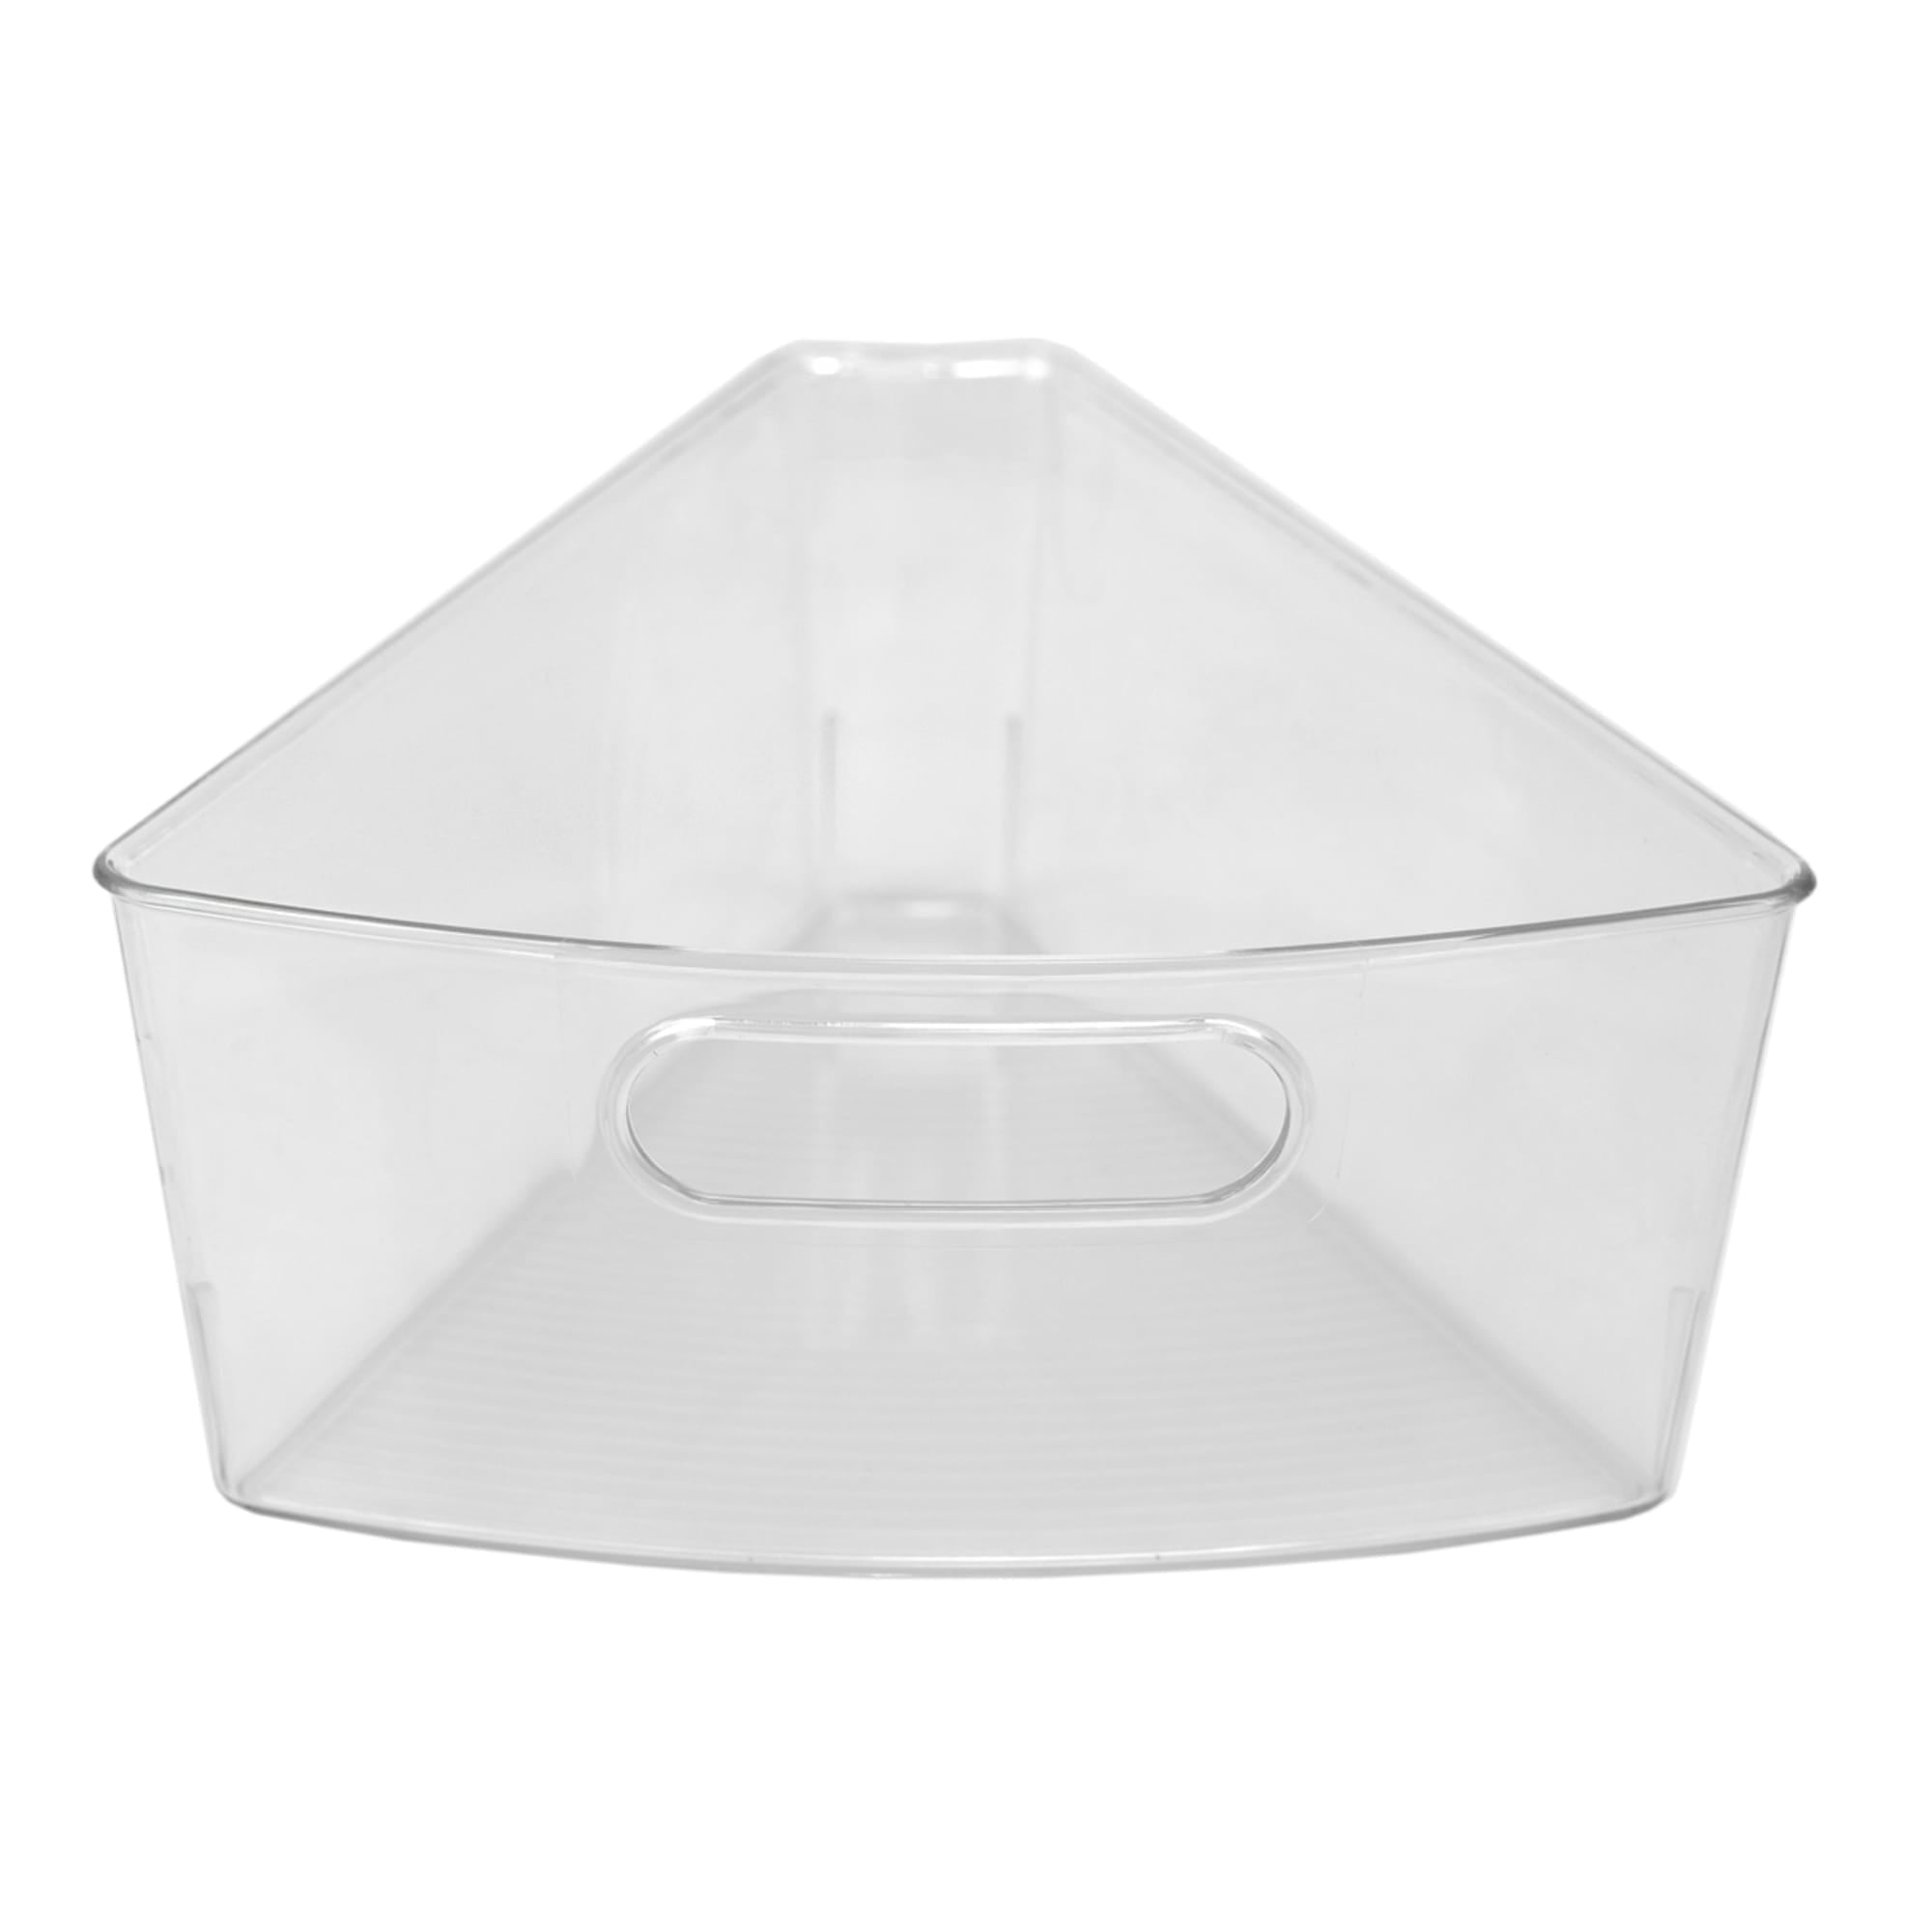 Home Basics Heavy Duty Plastic Lazy Susan Storage Organizing Bin with Front Cut-Out Handle, Clear $4.00 EACH, CASE PACK OF 12